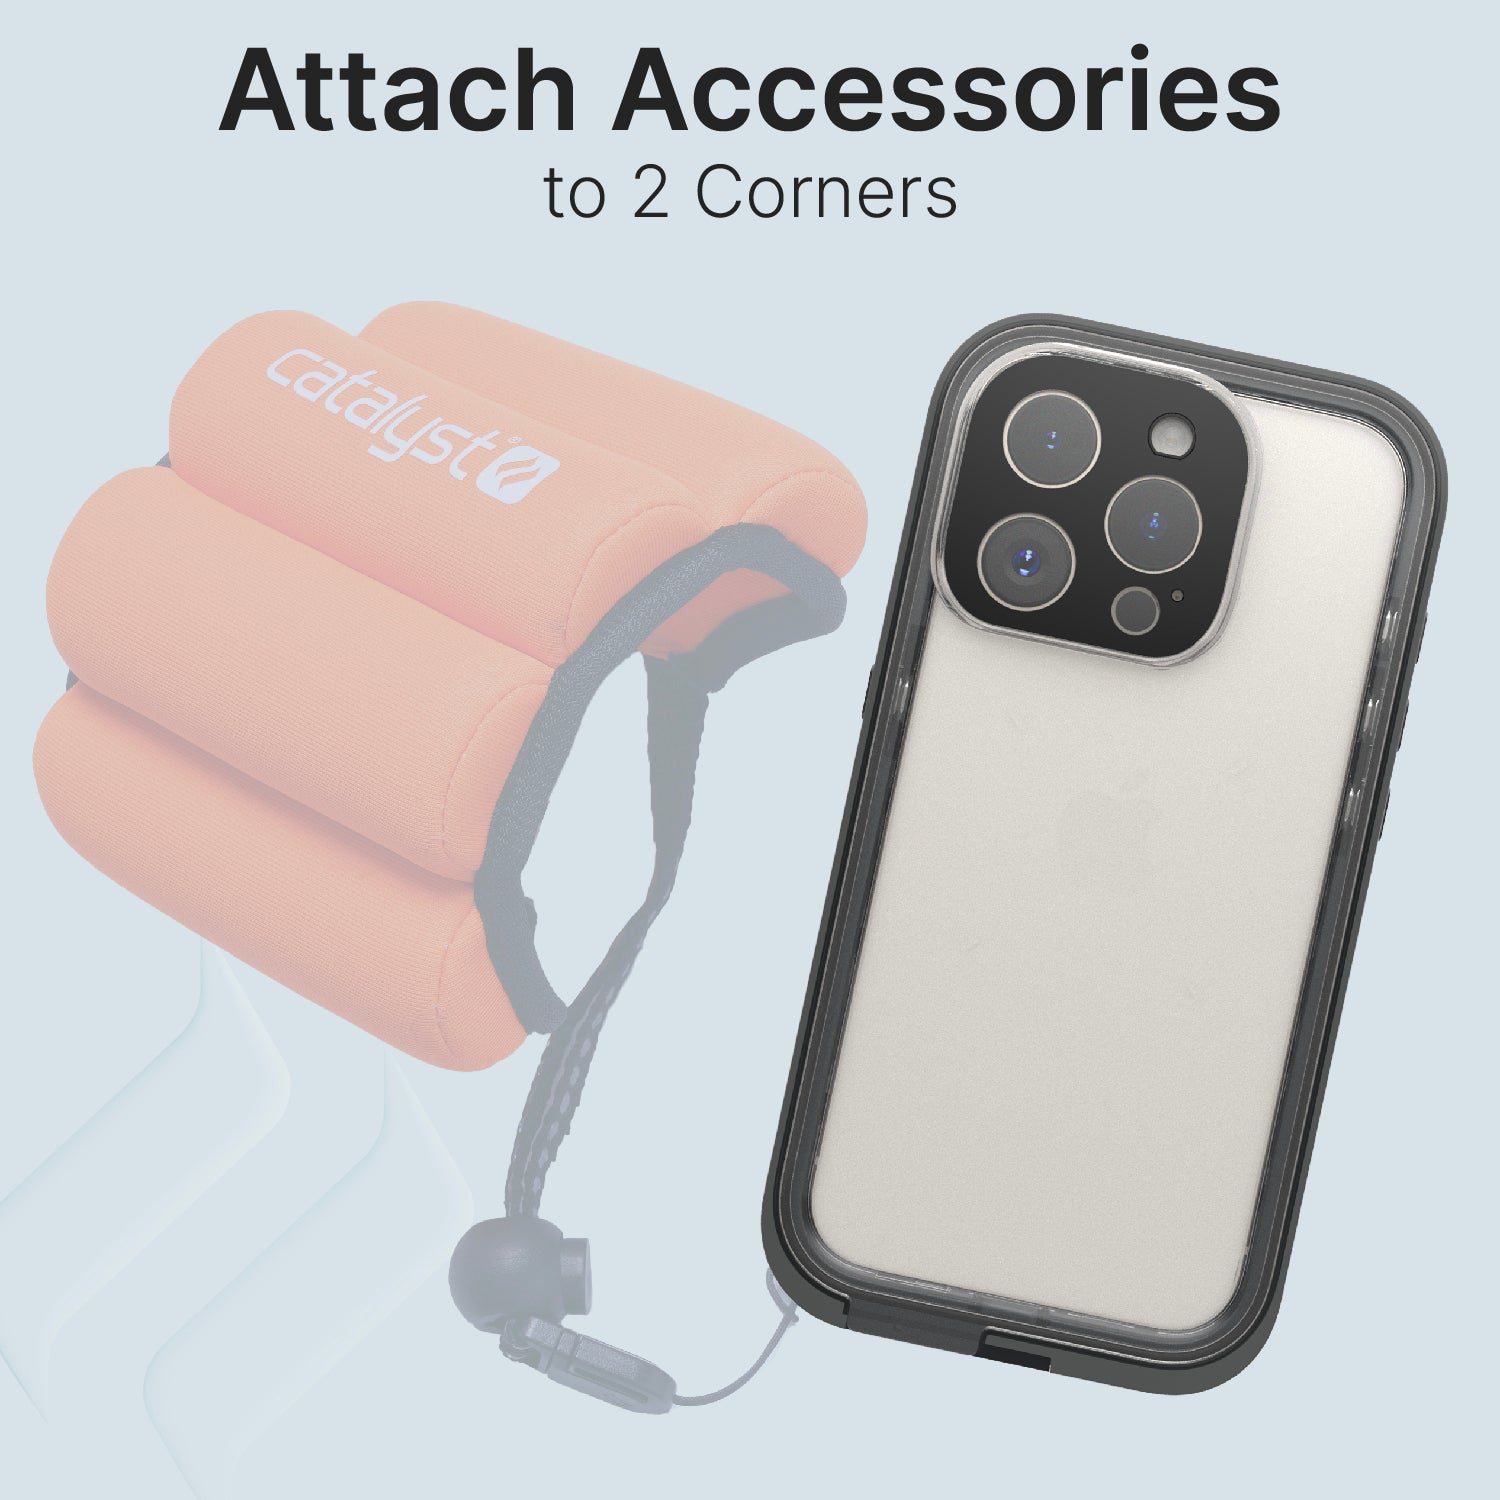 CATIPHO15GRYLP-FBA | Catalyst iPhone 15 Pro Max Waterproof Case Total Protection Floating Wrist Lanyard attached to one of the 2 corners of case